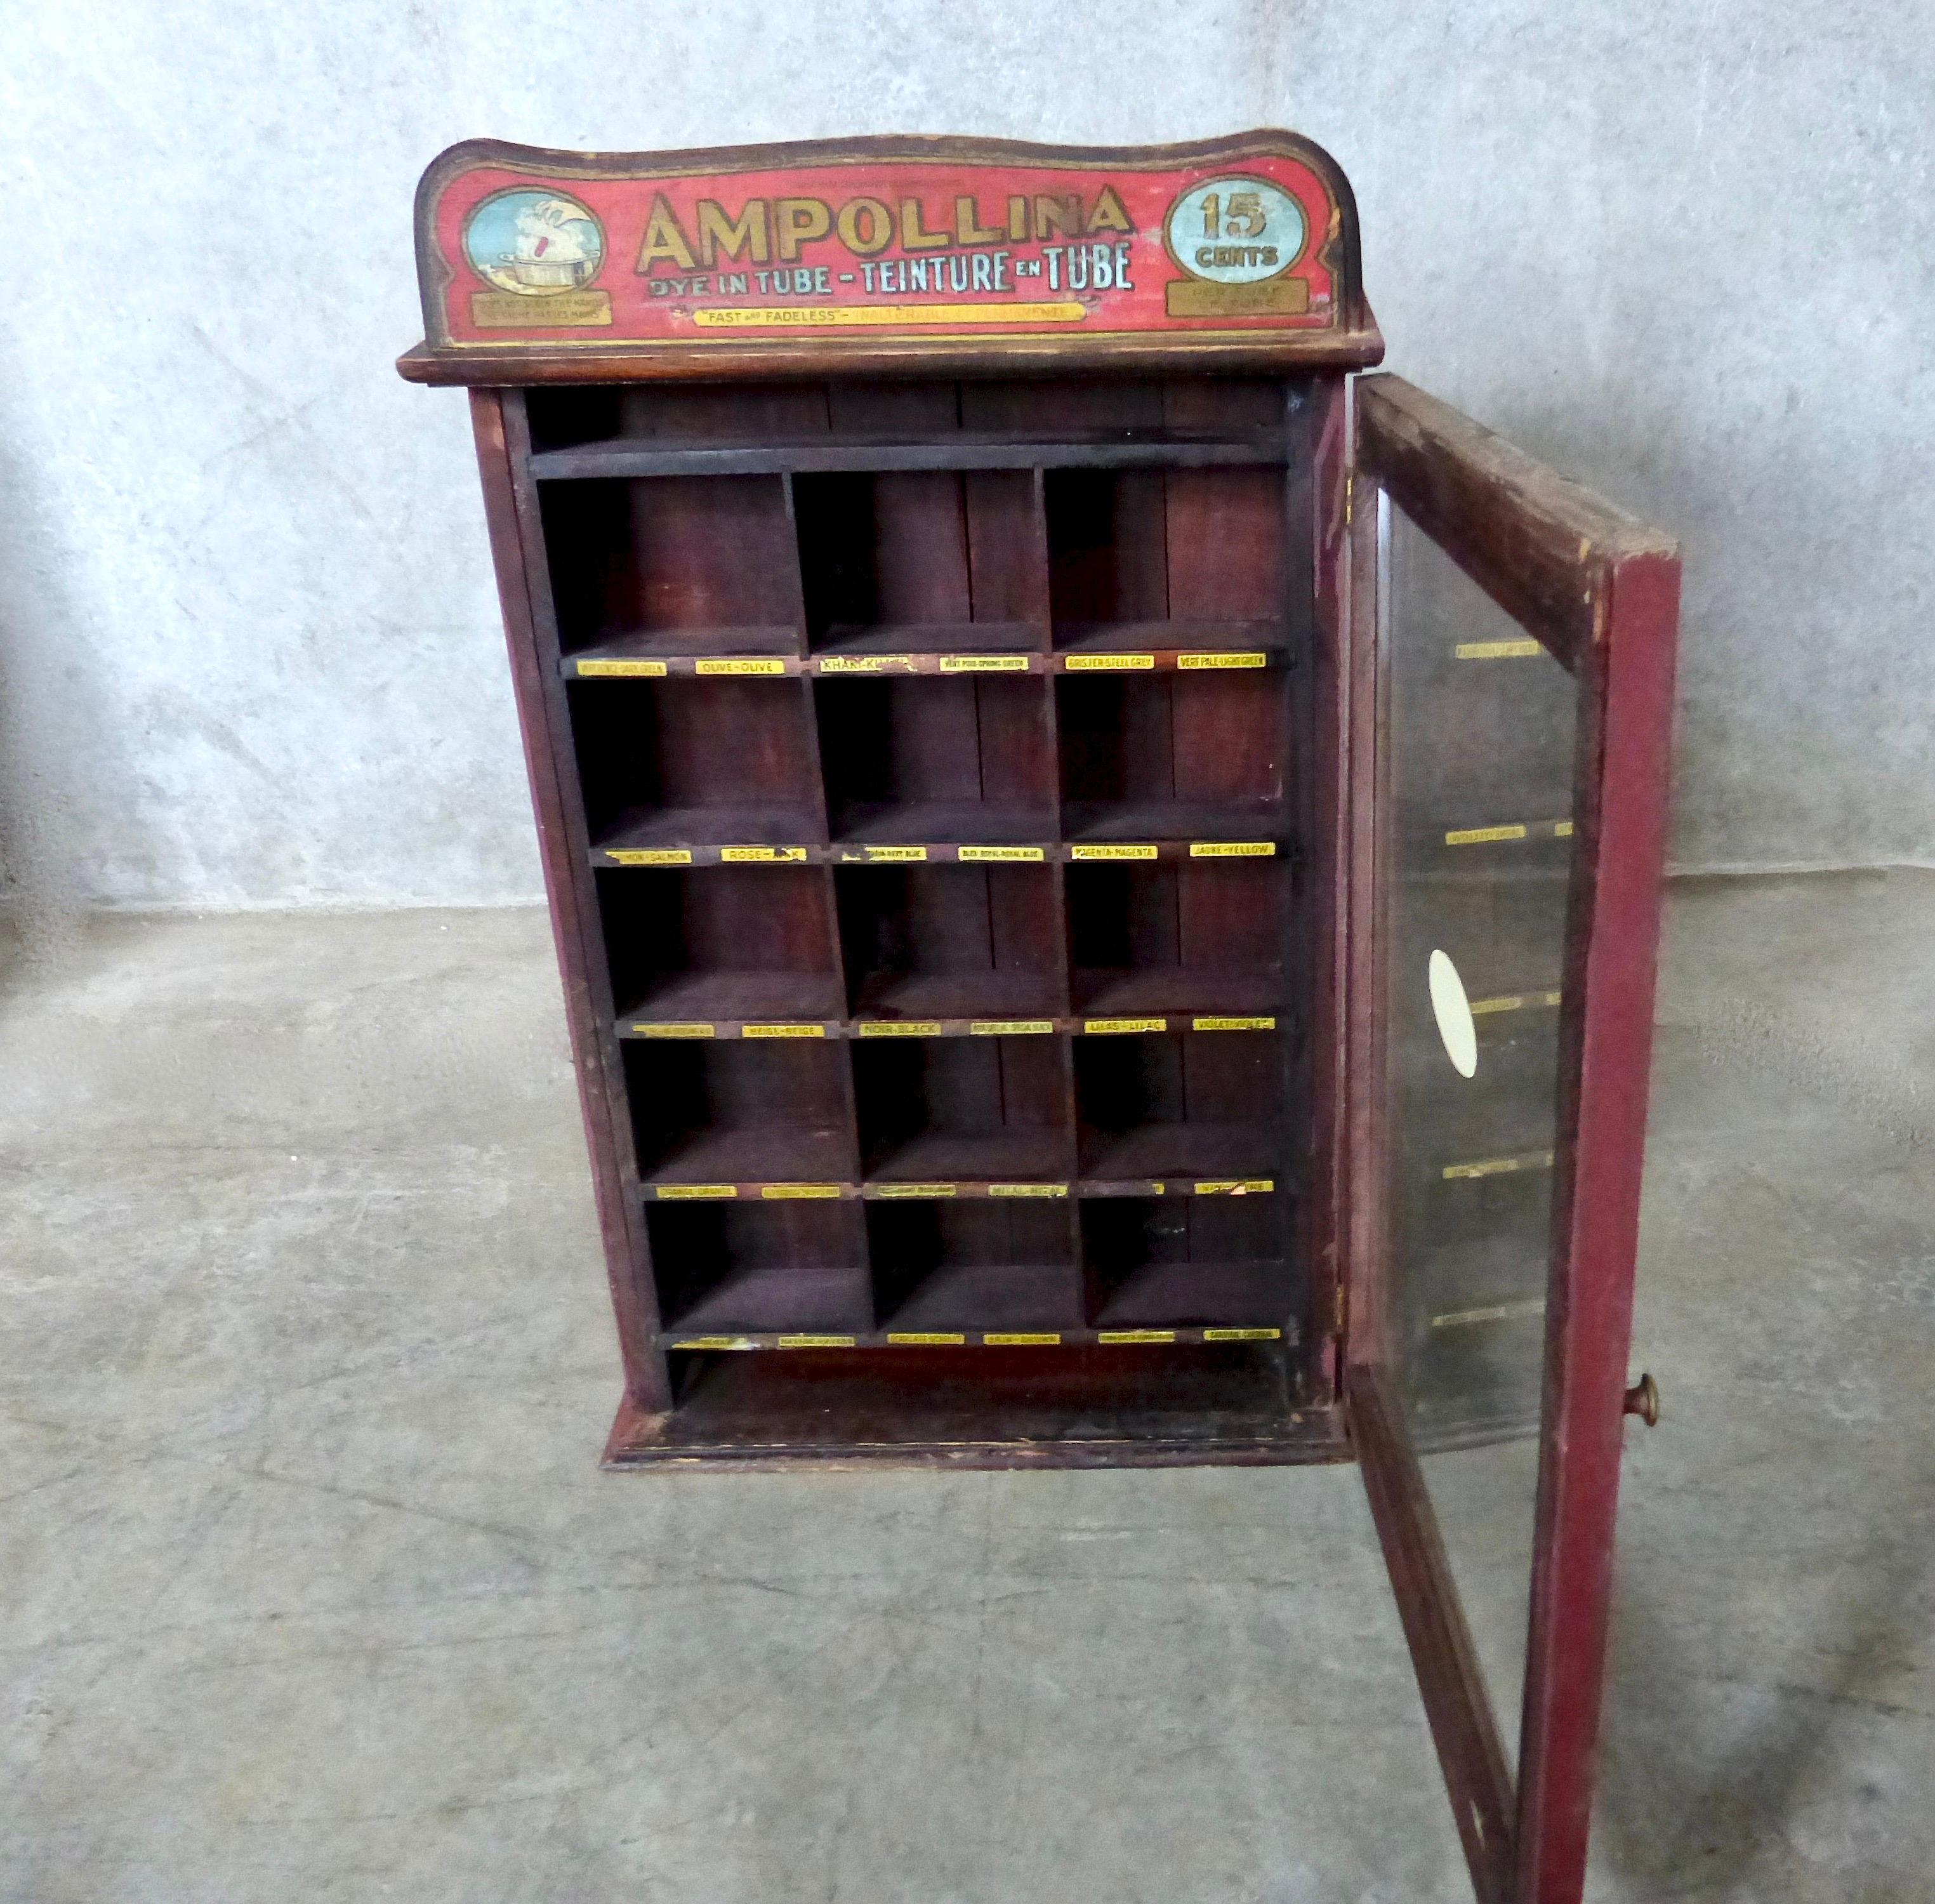 A small, apothecary-style wooden countertop cabinet used to merchandise Ampollina dyes from Germany. The nicely angled retail case from circa 1920 features a glass front panel plus a hidden area in the back to store additional stock. Labels and